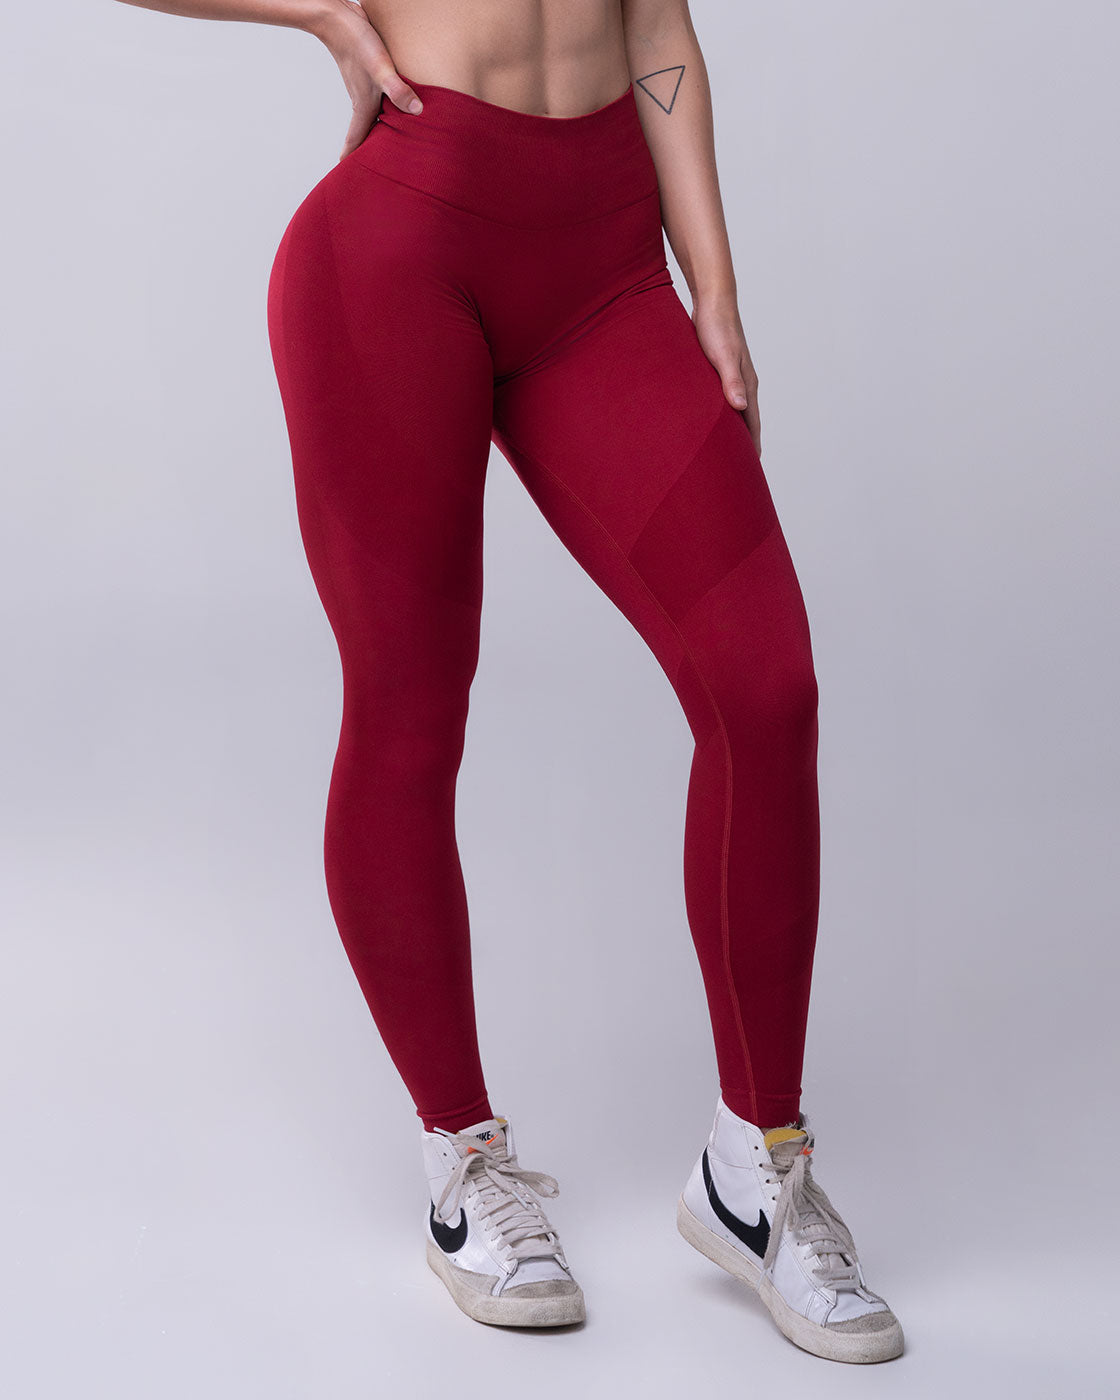 Violate The Dress Code - 🚨New Drop 🚨 Undisputed hottest leggings